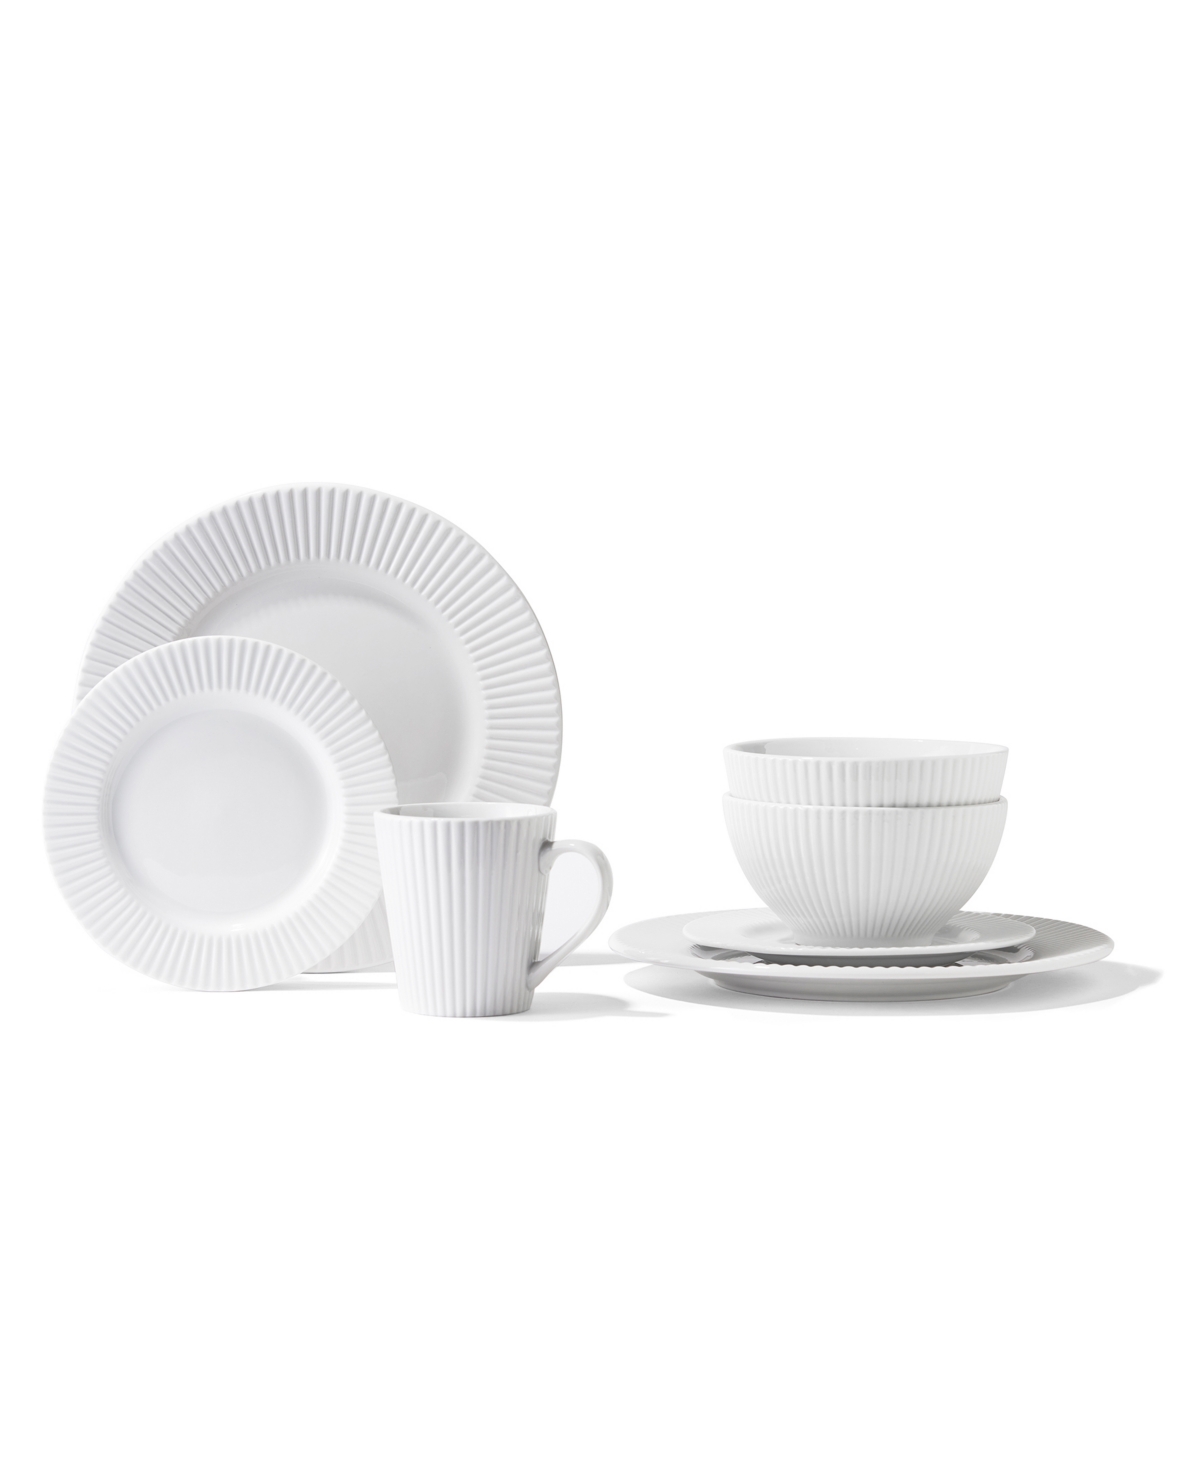 Jay Imports Reese 16 Piece Dinner Set In White